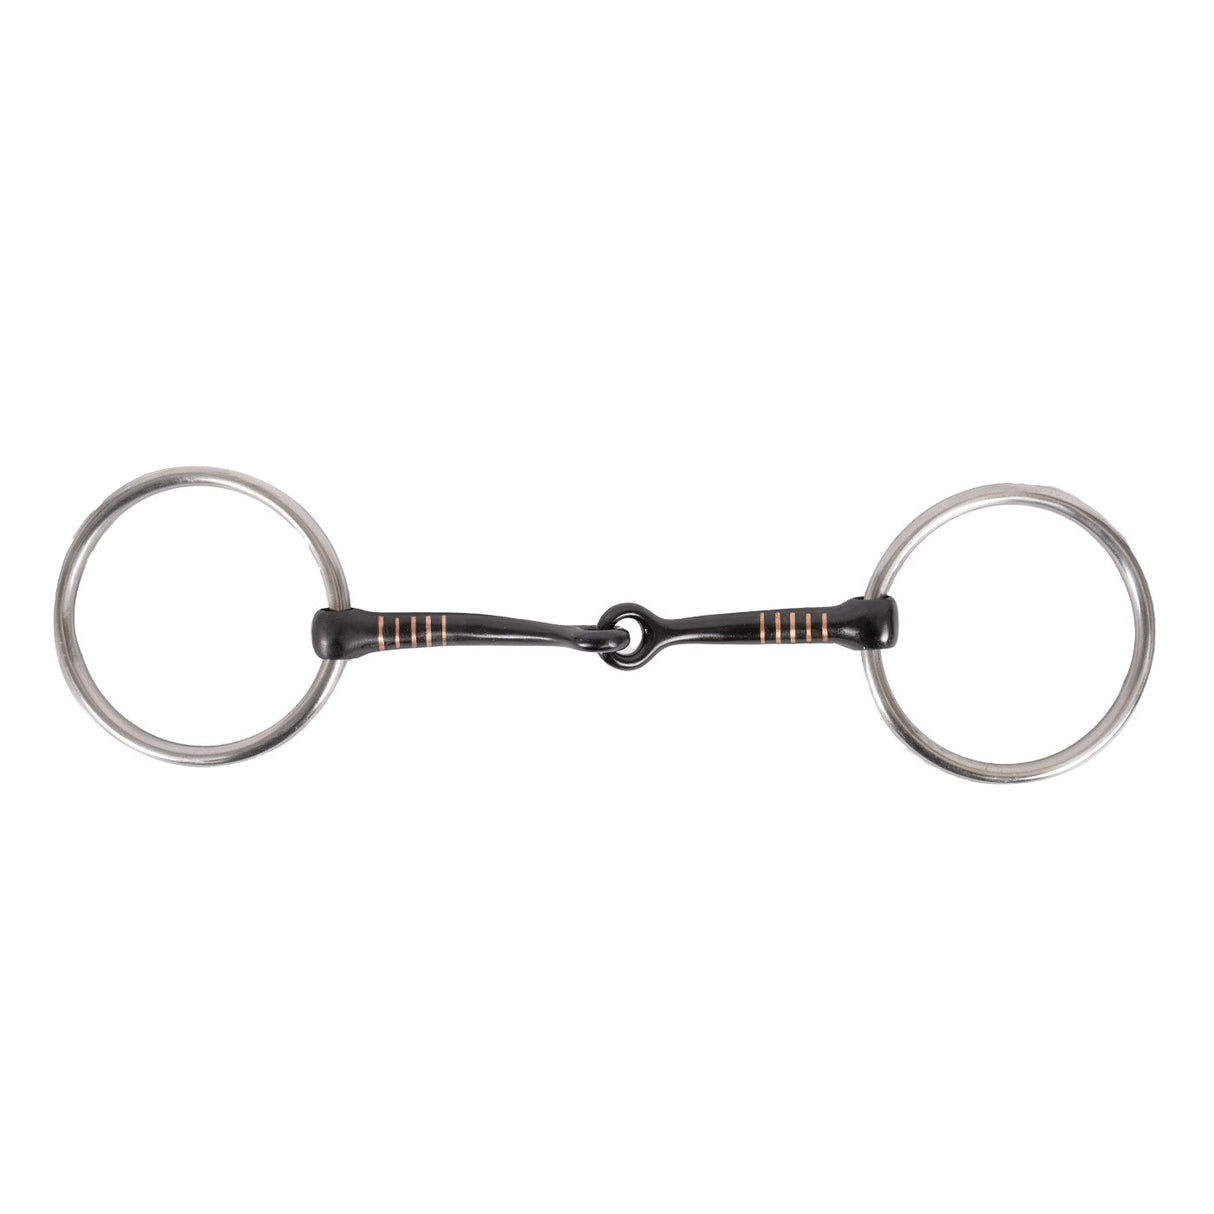 EvoEq Loose Ring Sweet Iron Snaffle Bit W/ Copper Inlay